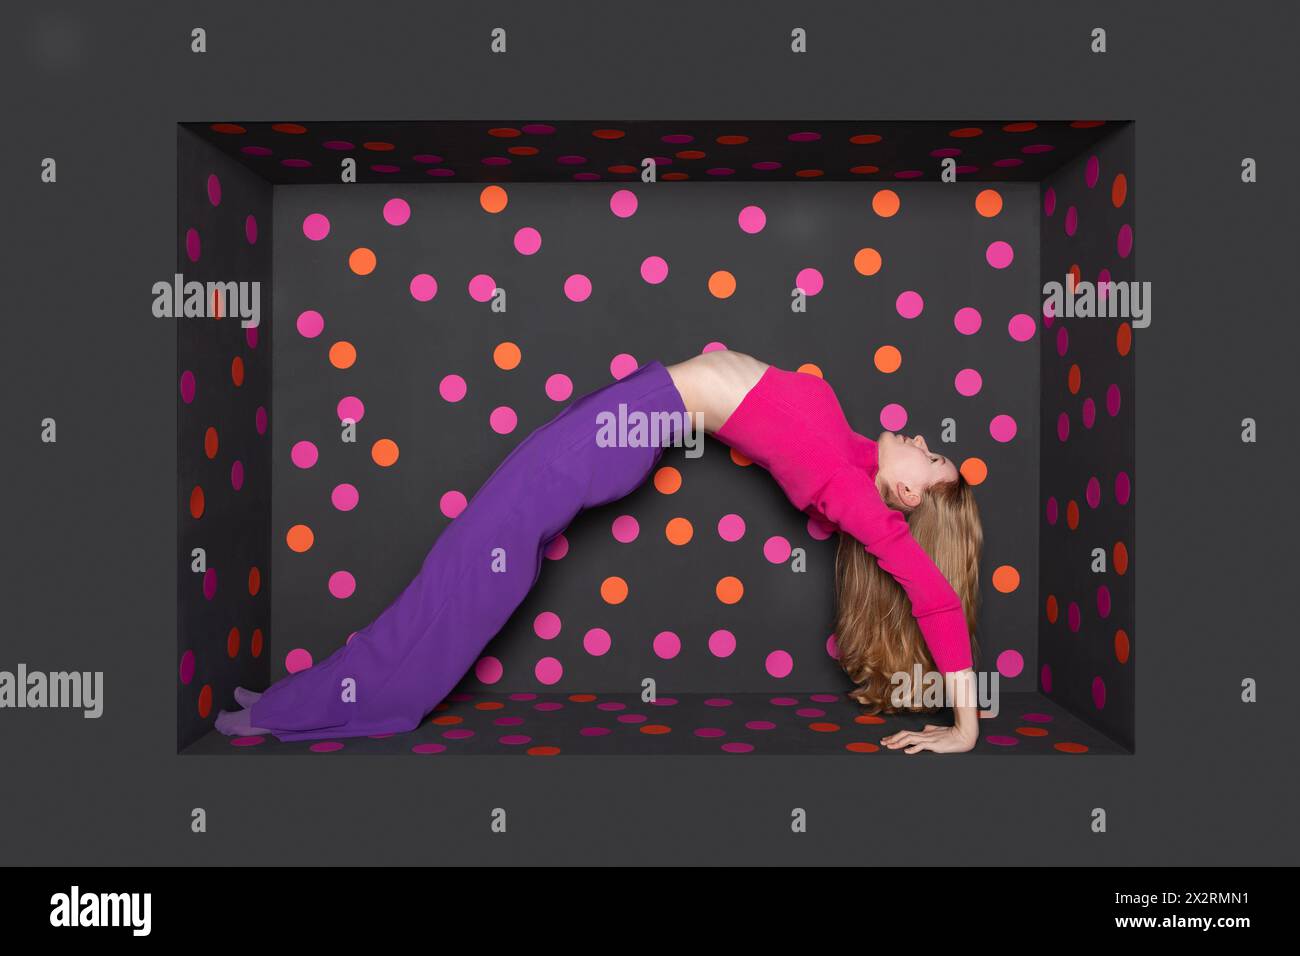 Teenage girl bending backward over black background with colored dots Stock Photo